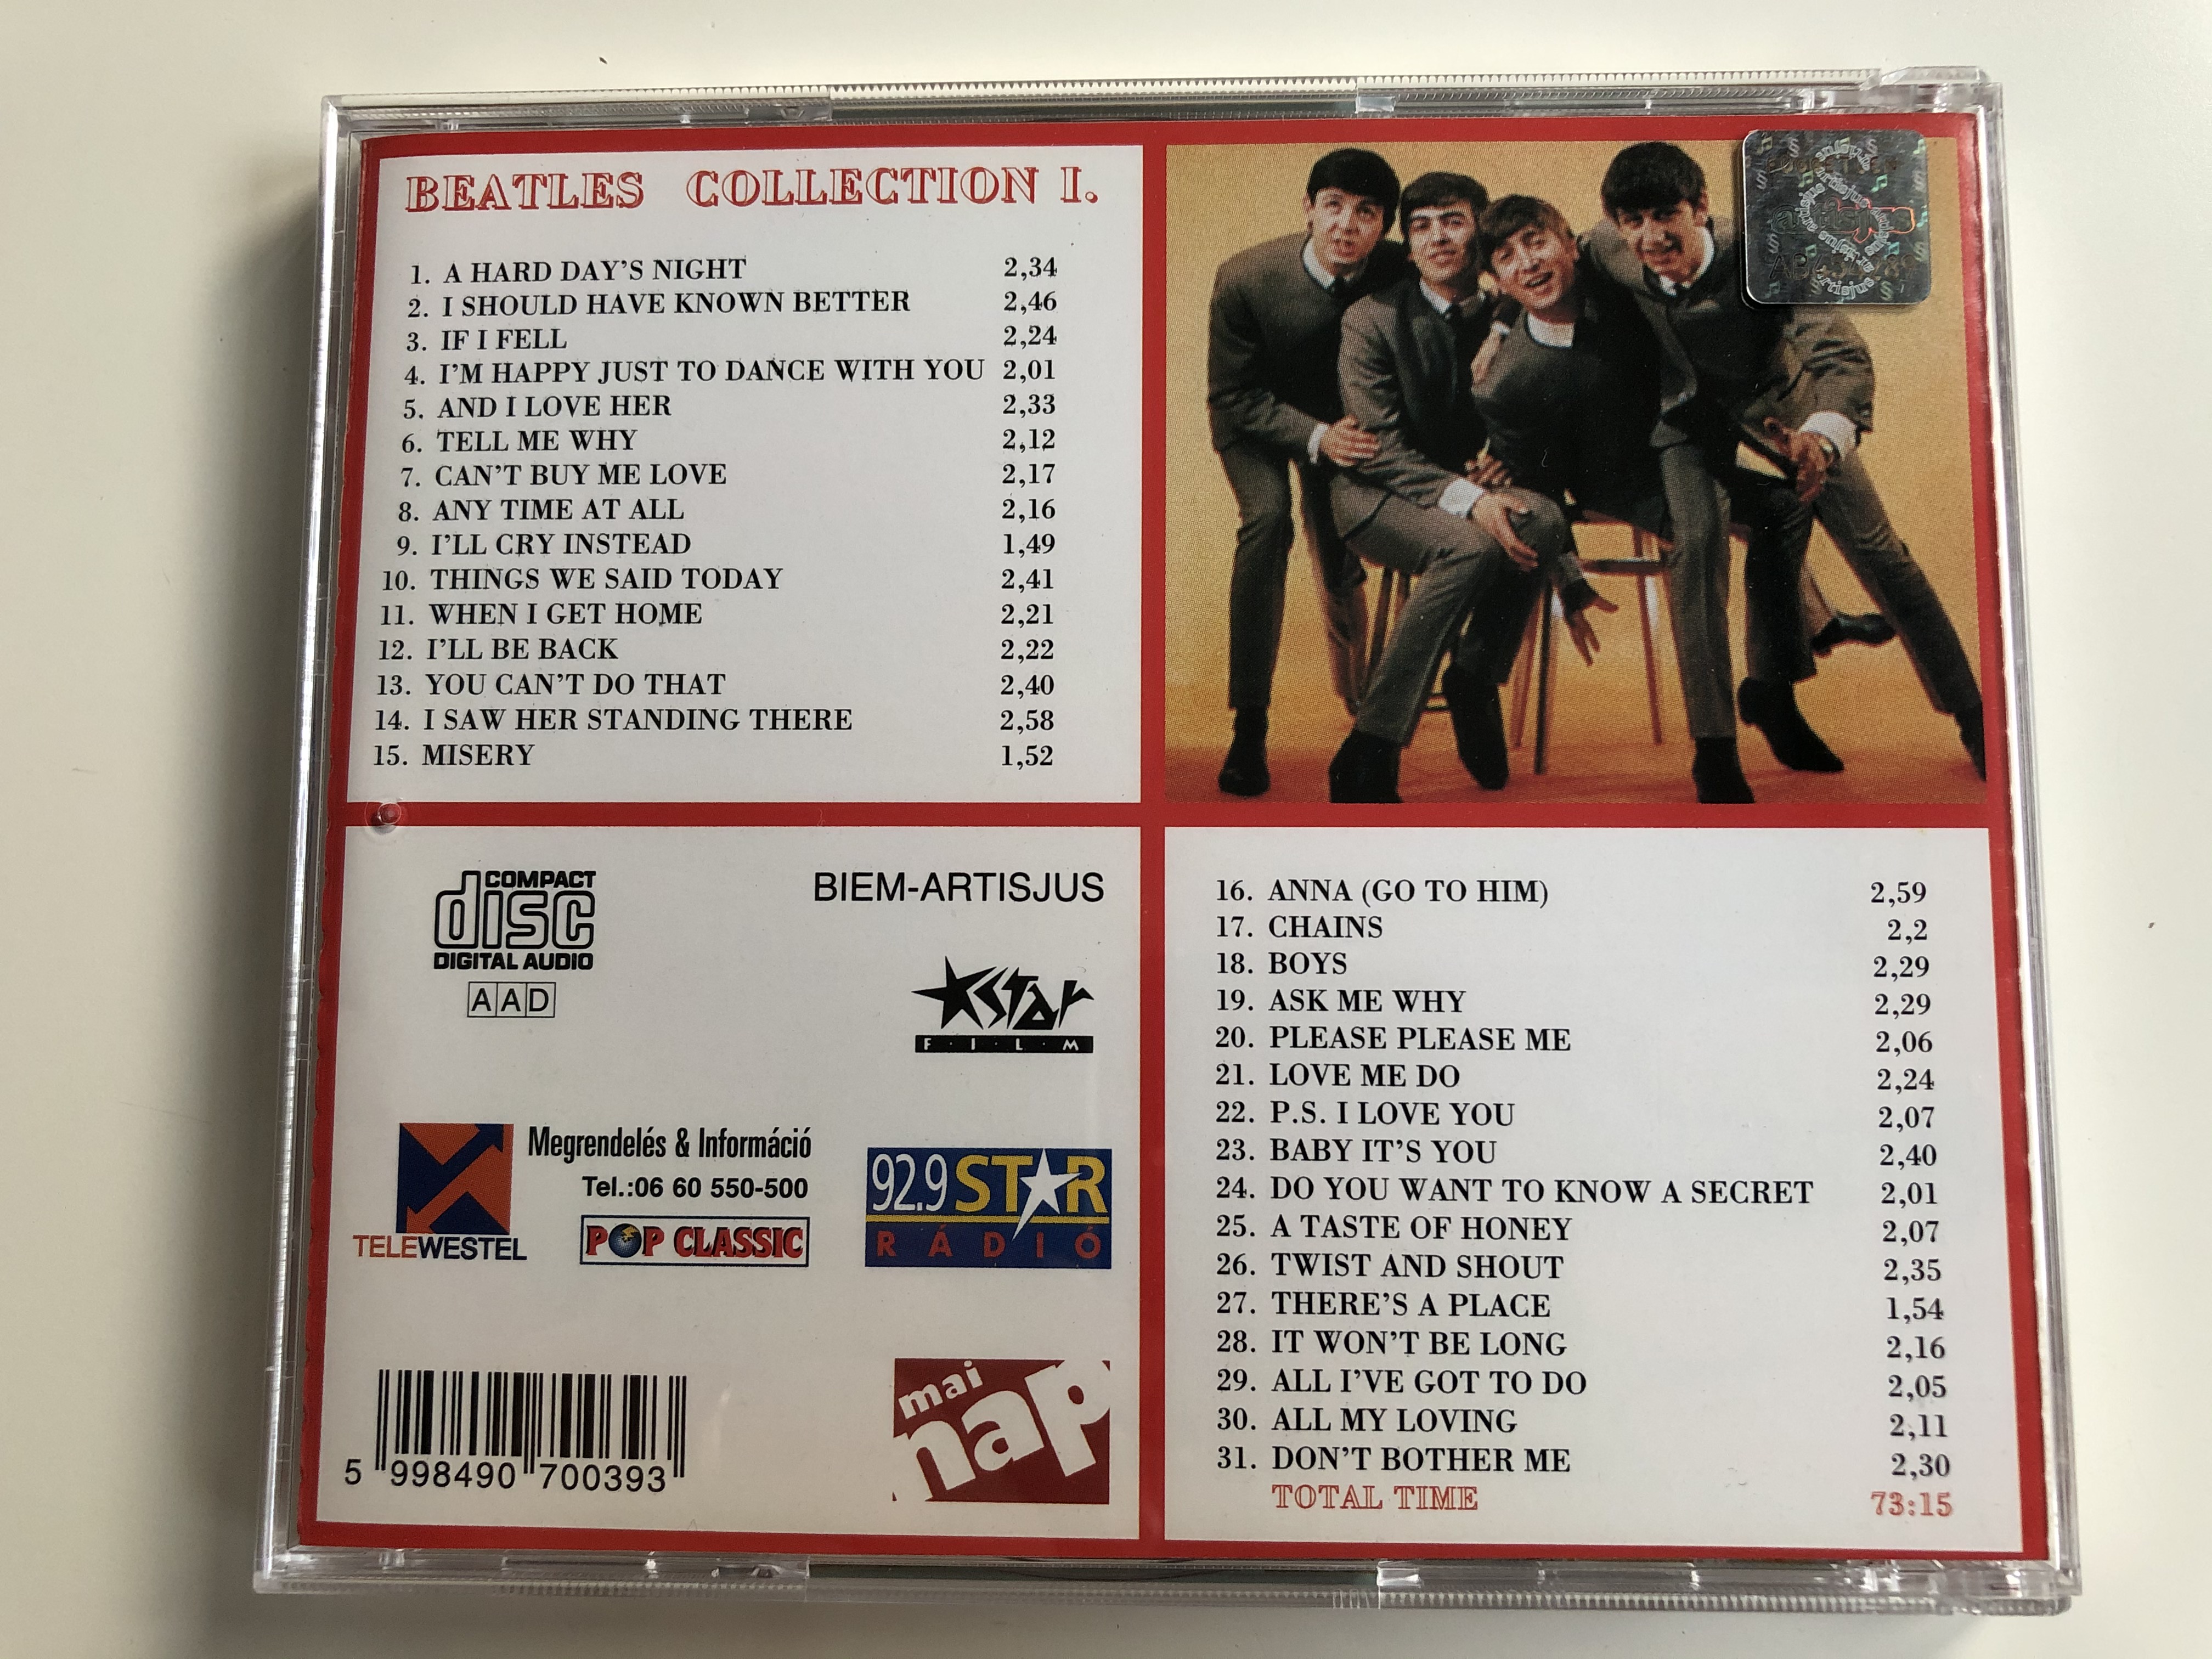 the-beatles-collection-i.-total-timr-7315-pop-classic-euroton-audio-cd-eucd-0039-4-.jpg